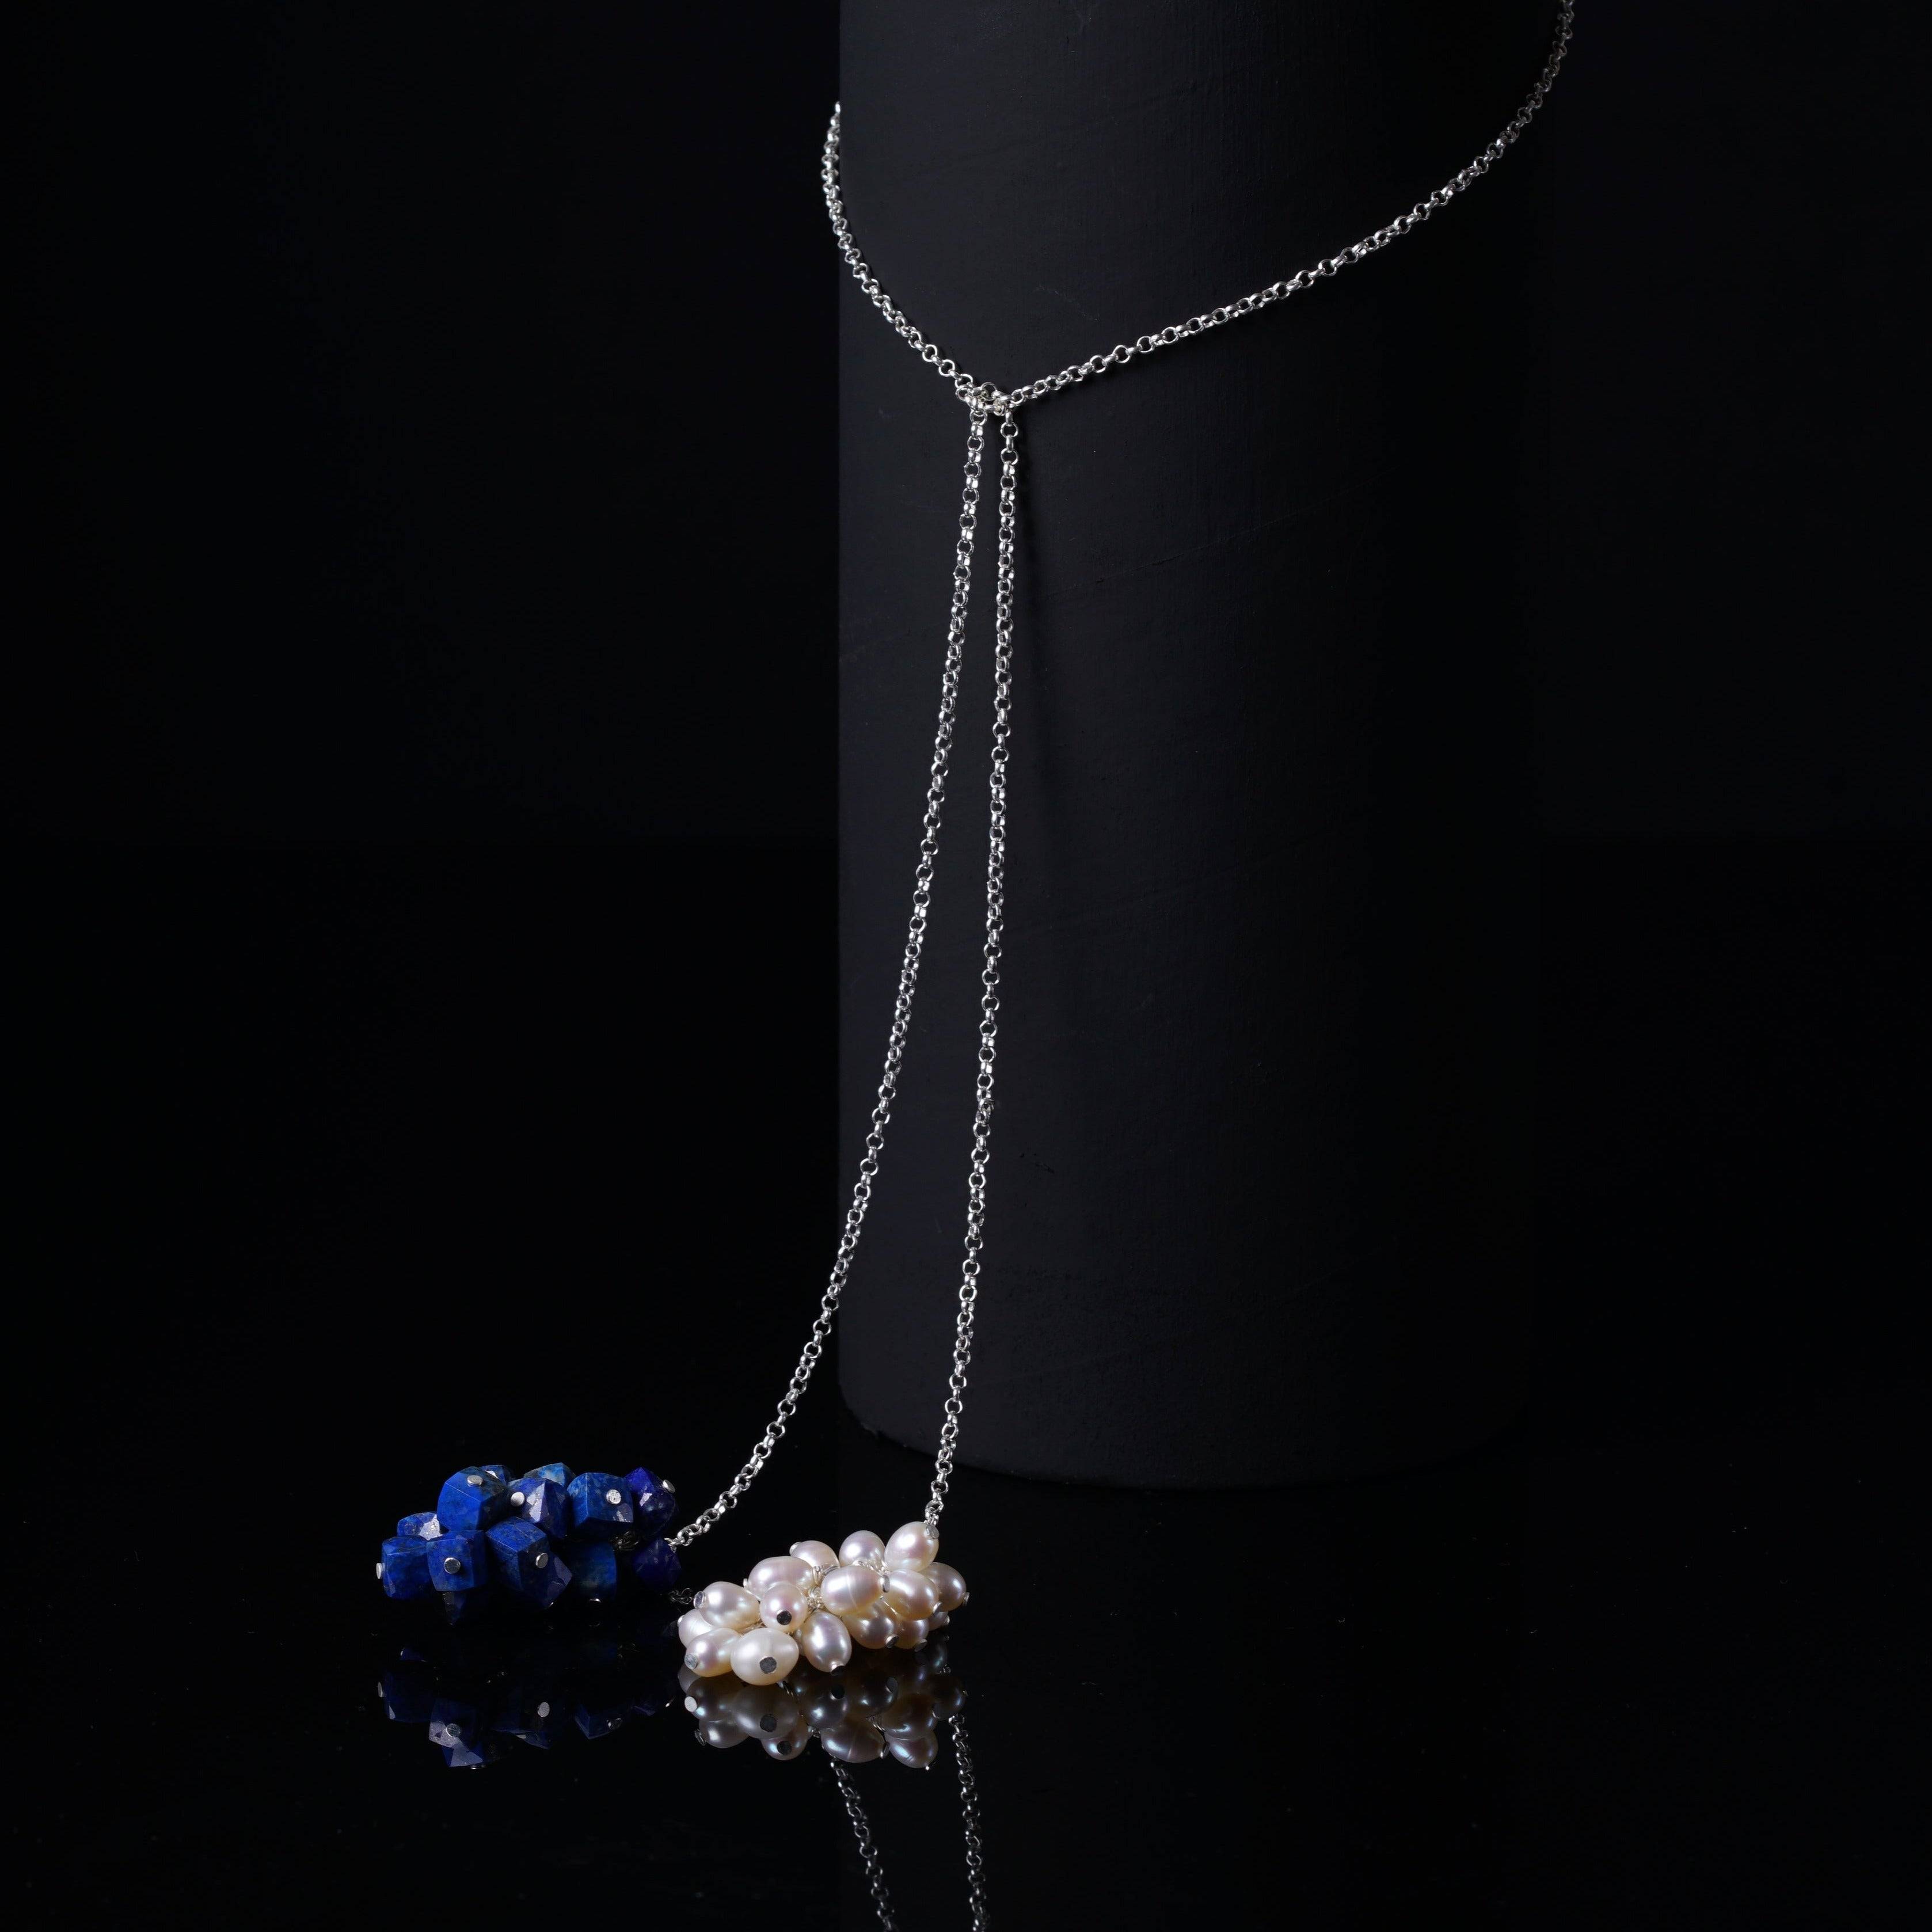 Tie and Wear Necklace : Lapis and Fresh Water Pearls